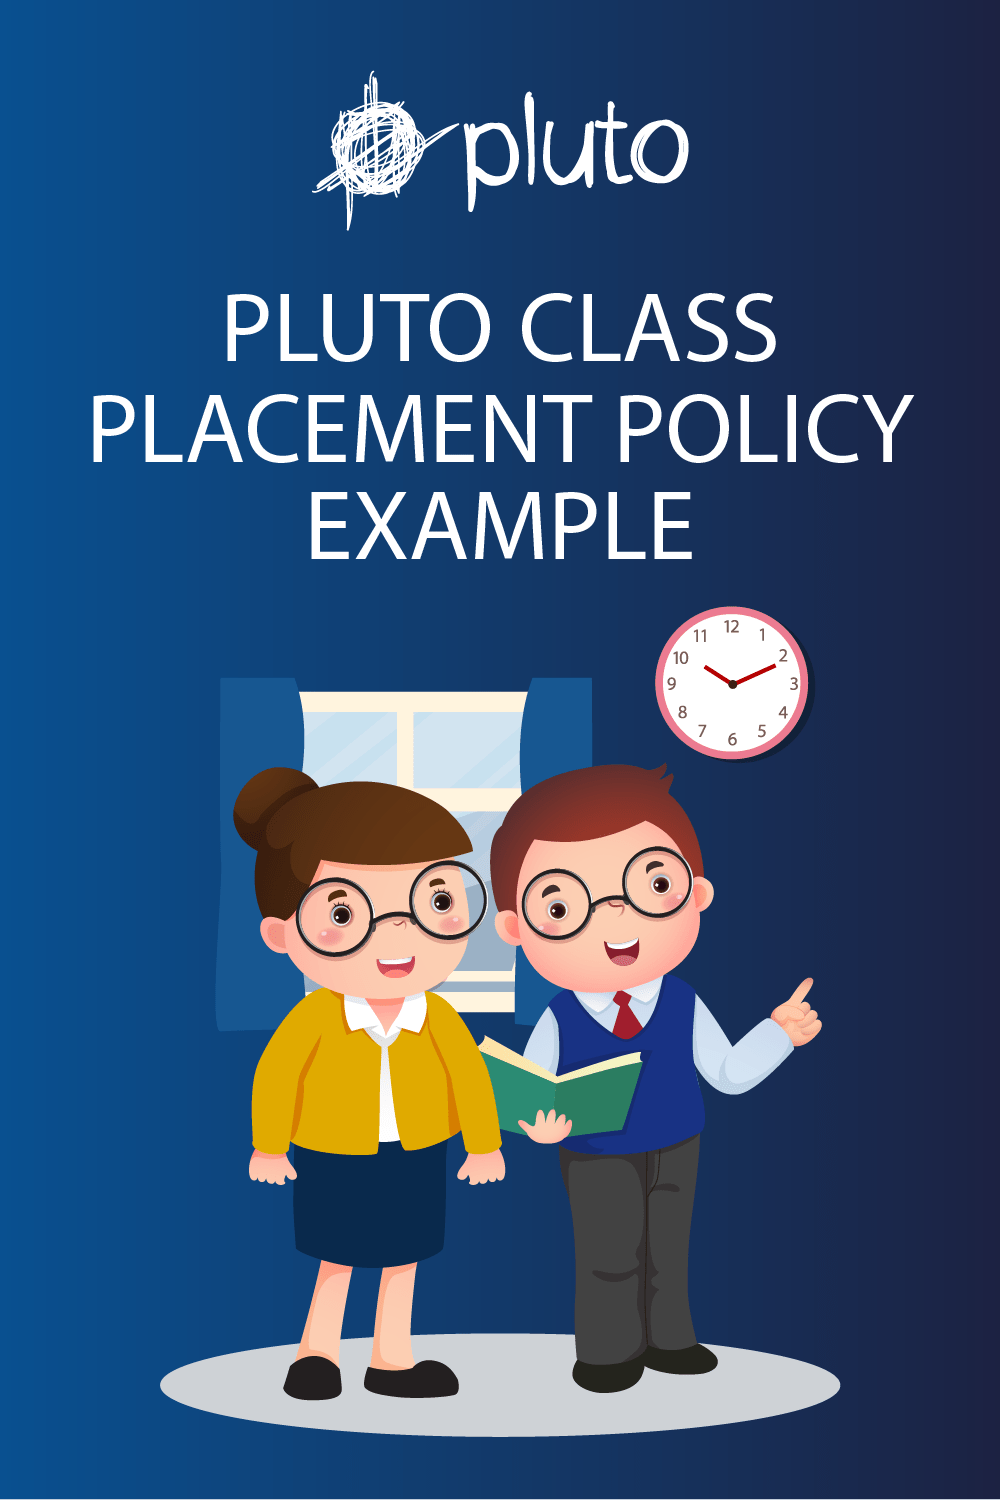 Image showing Pluto's class placement policy example